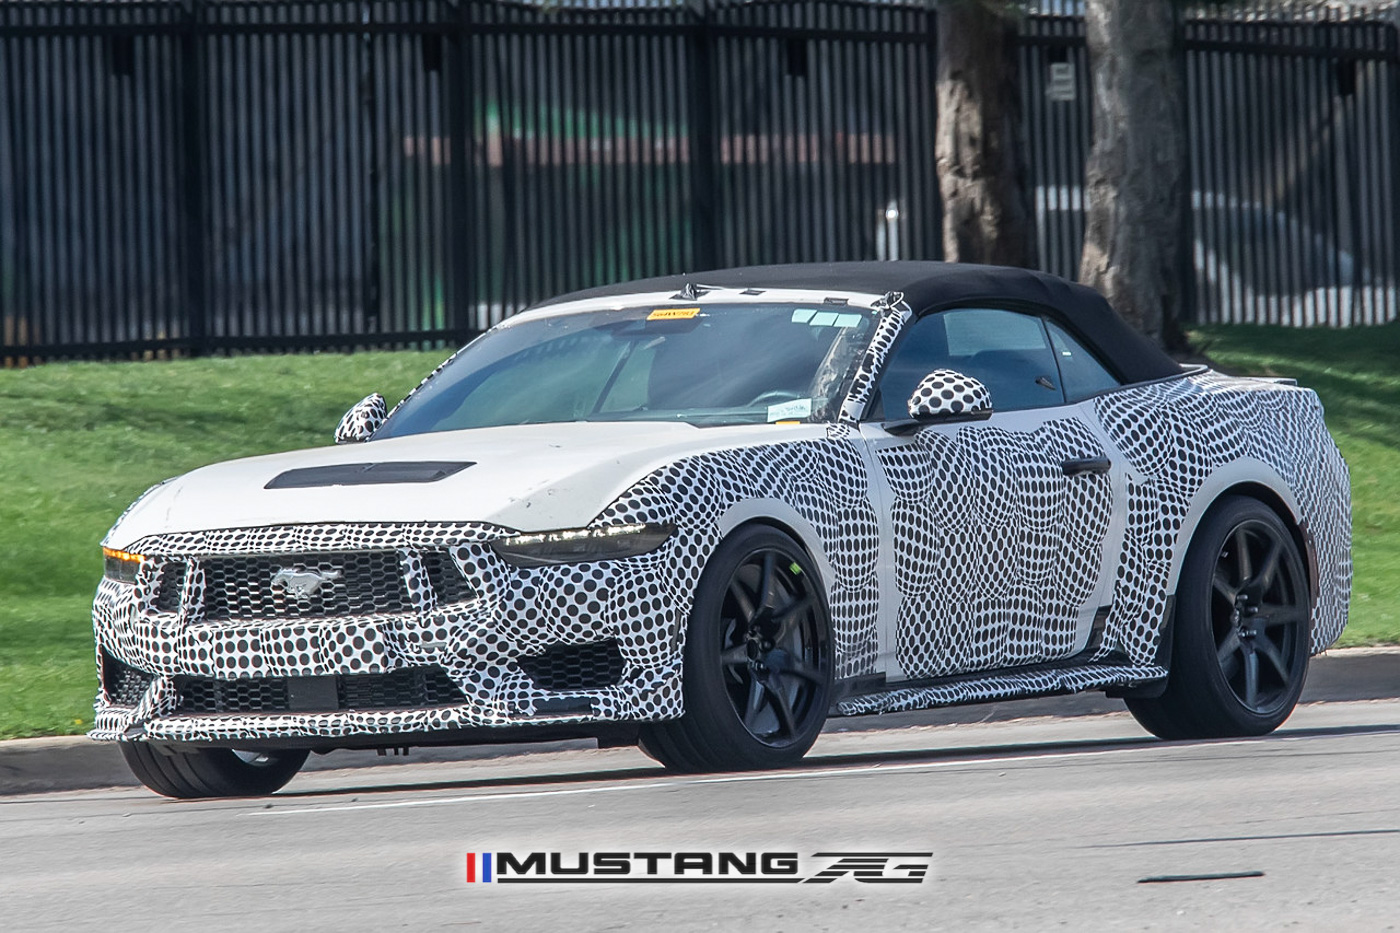 S650 Mustang 2026 Shelby GT500 Mustang Convertible Spied w/ Revised Grille, Carbon Fiber Wheels & Larger Global Market Side Mirrors 2026-shelby-gt500-mustang-convertible-prototype-spied-2